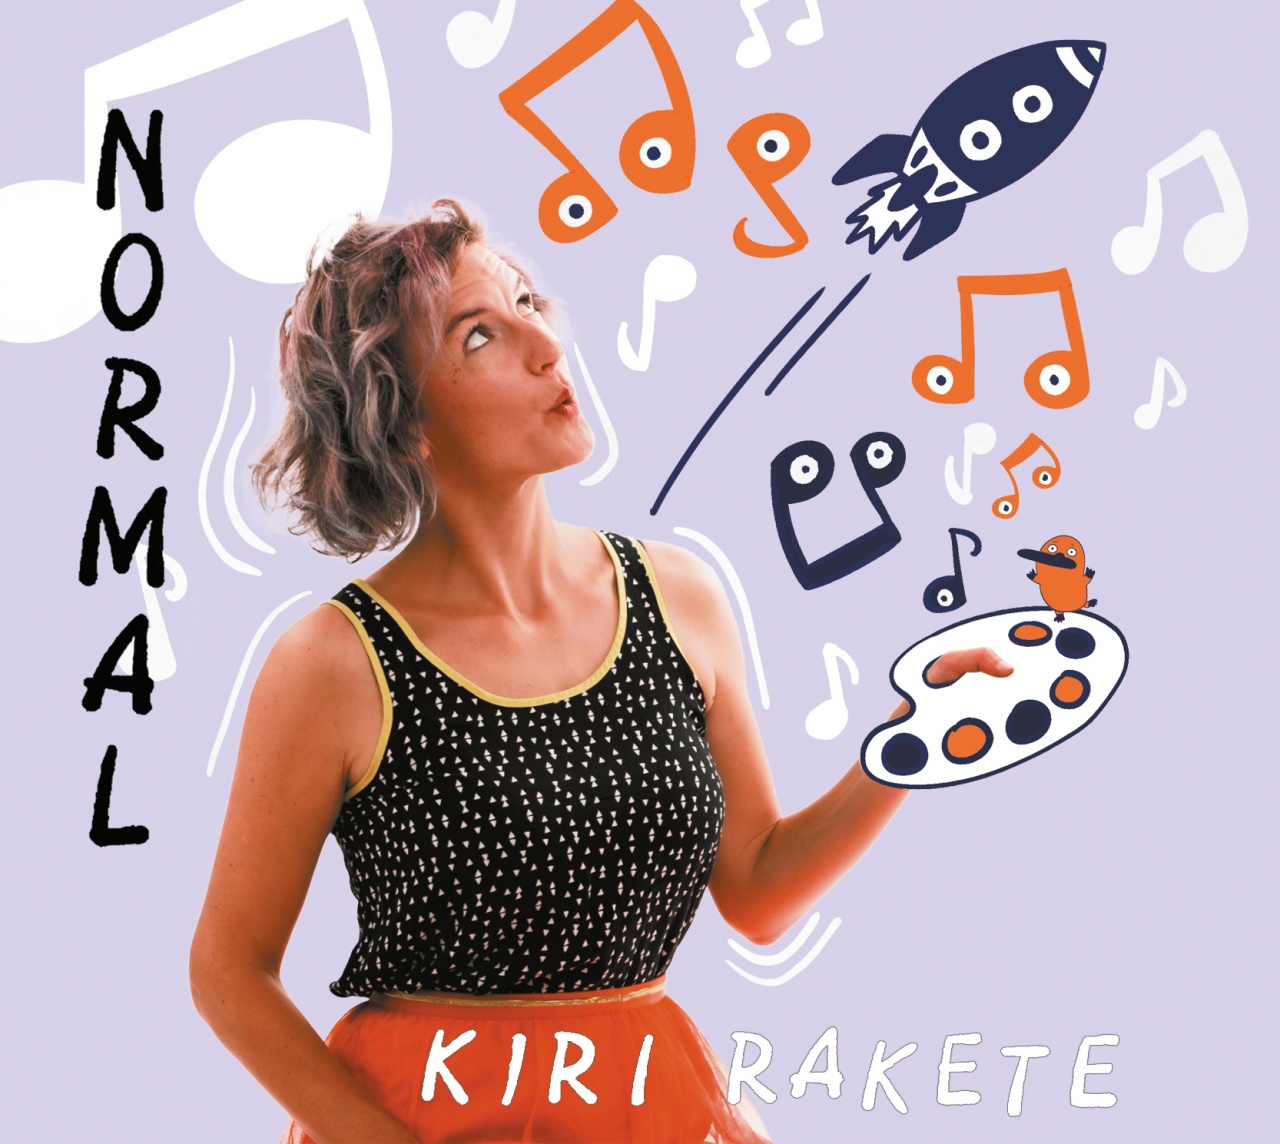 Albumcover "Normal"